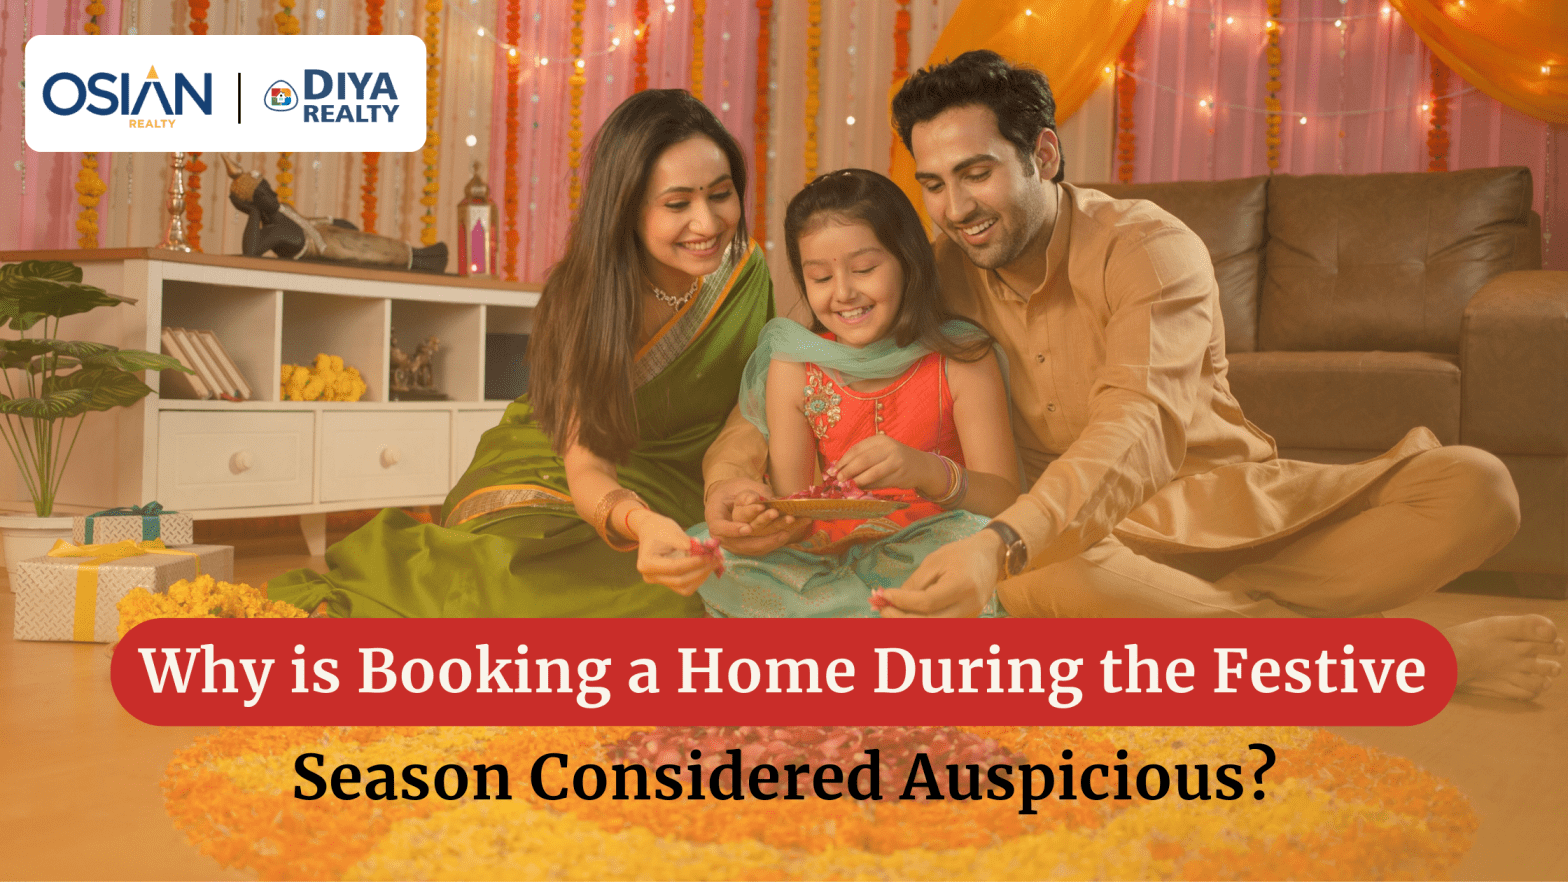 Why is booking a home during the festive season considered auspicious?